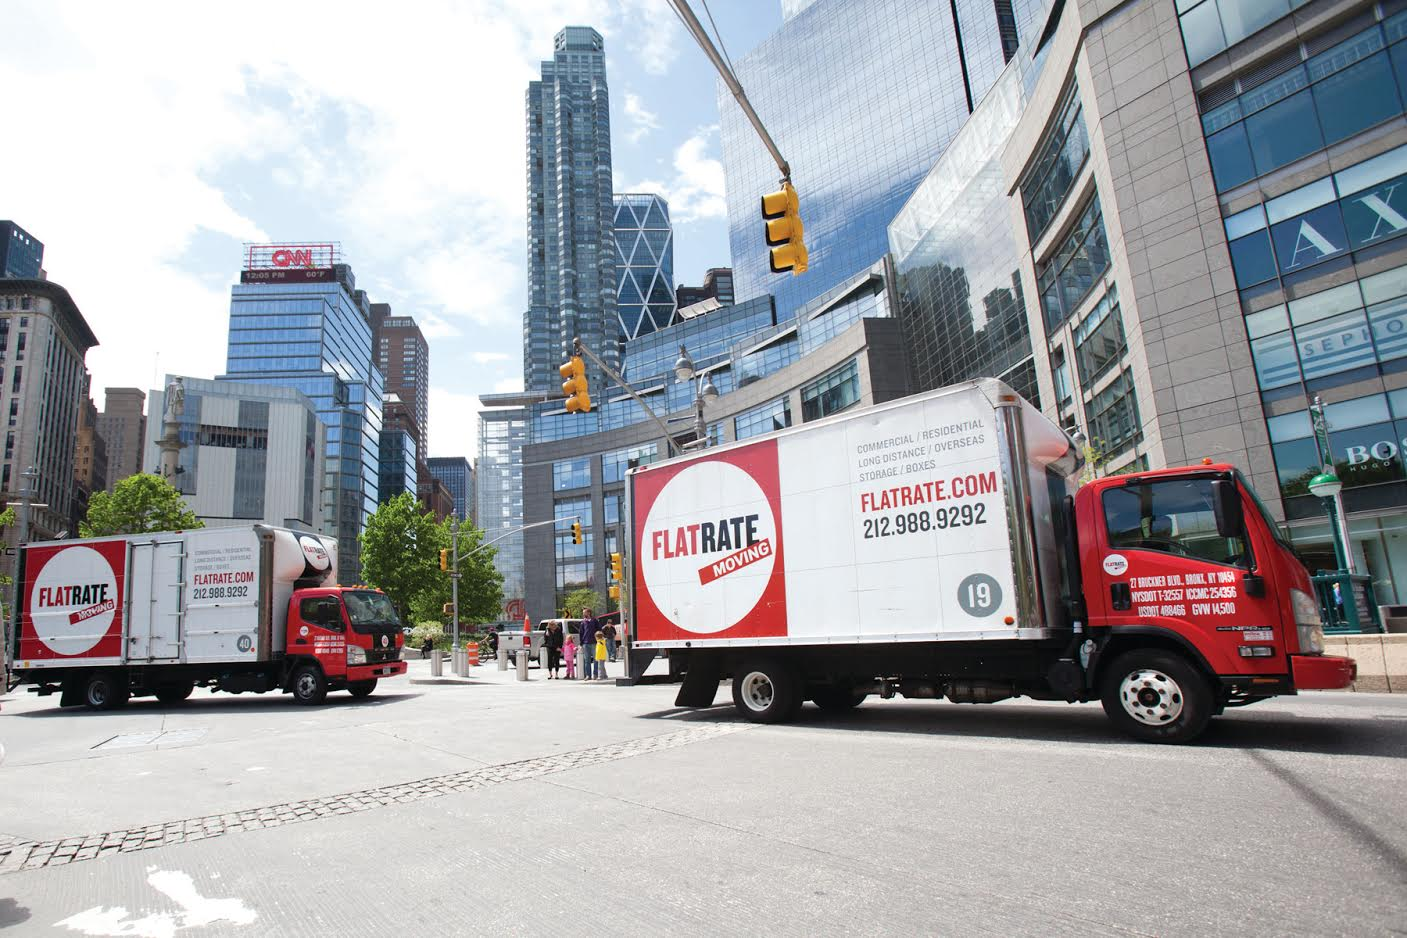 How to move from a house to a tiny NYC apartment: rent a moving truck.